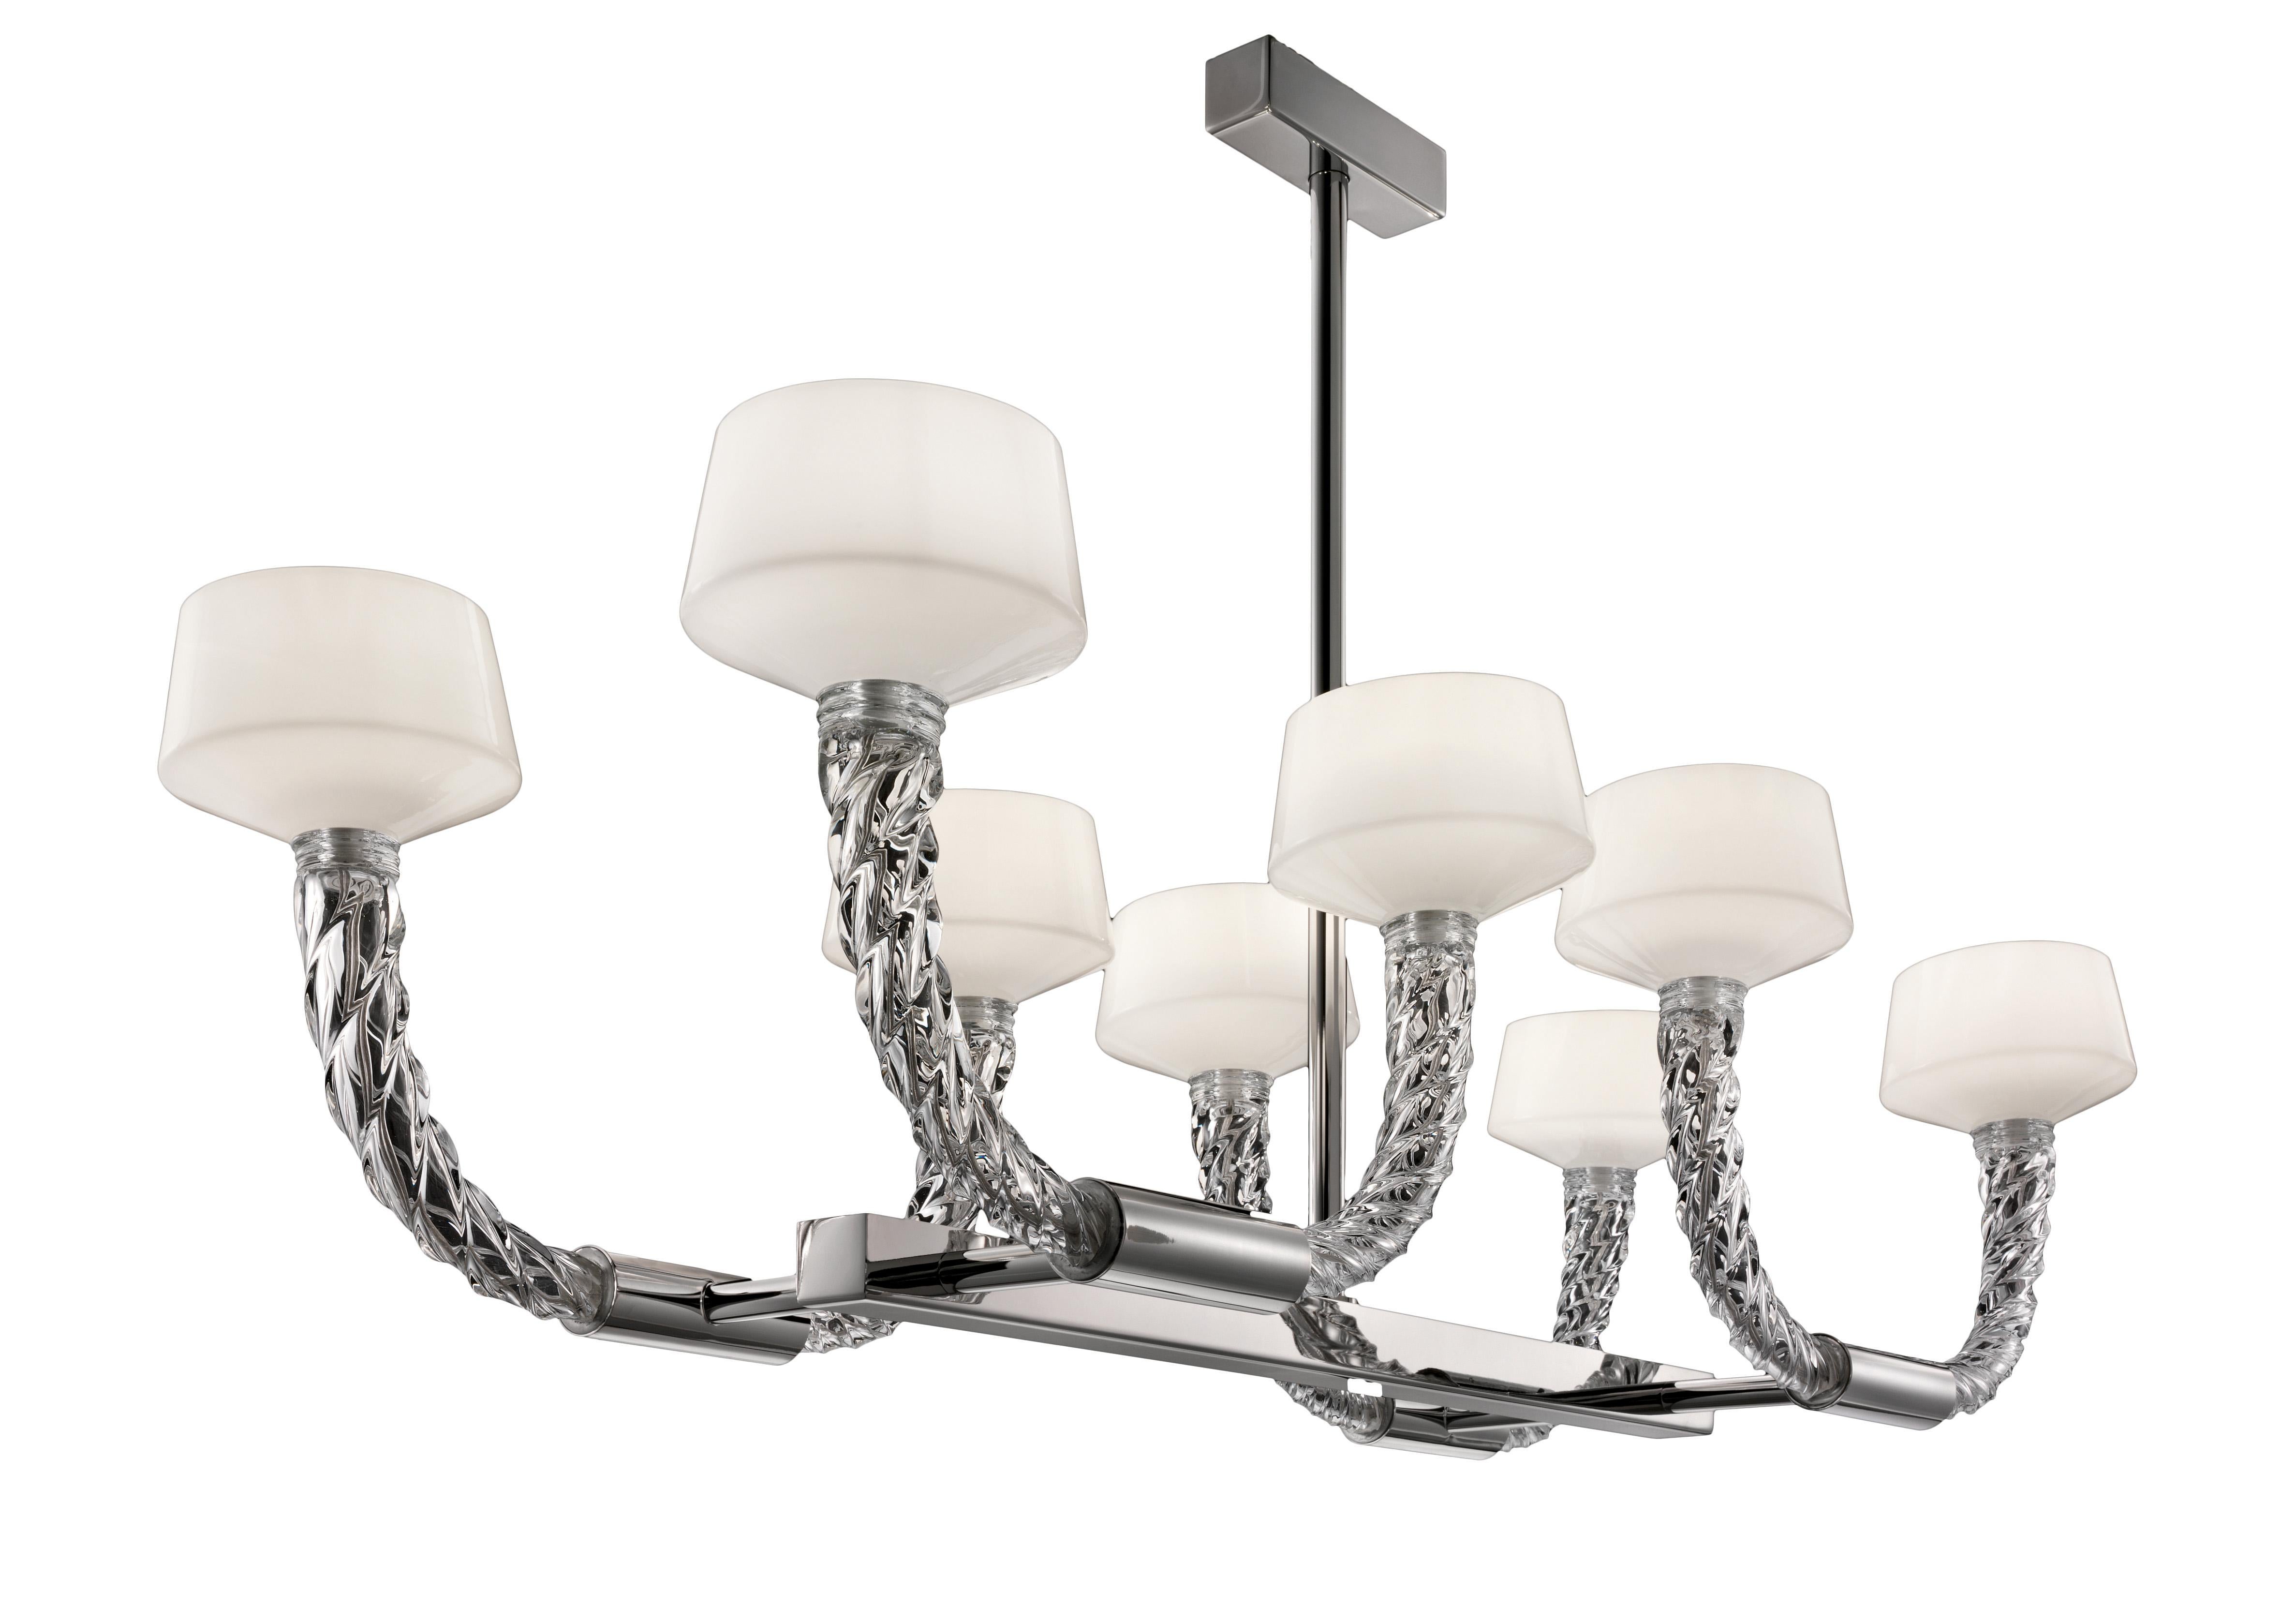 Modern Twins 7226 08 Chandelier in Glass with Chrome Finishing, by Barovier&Toso